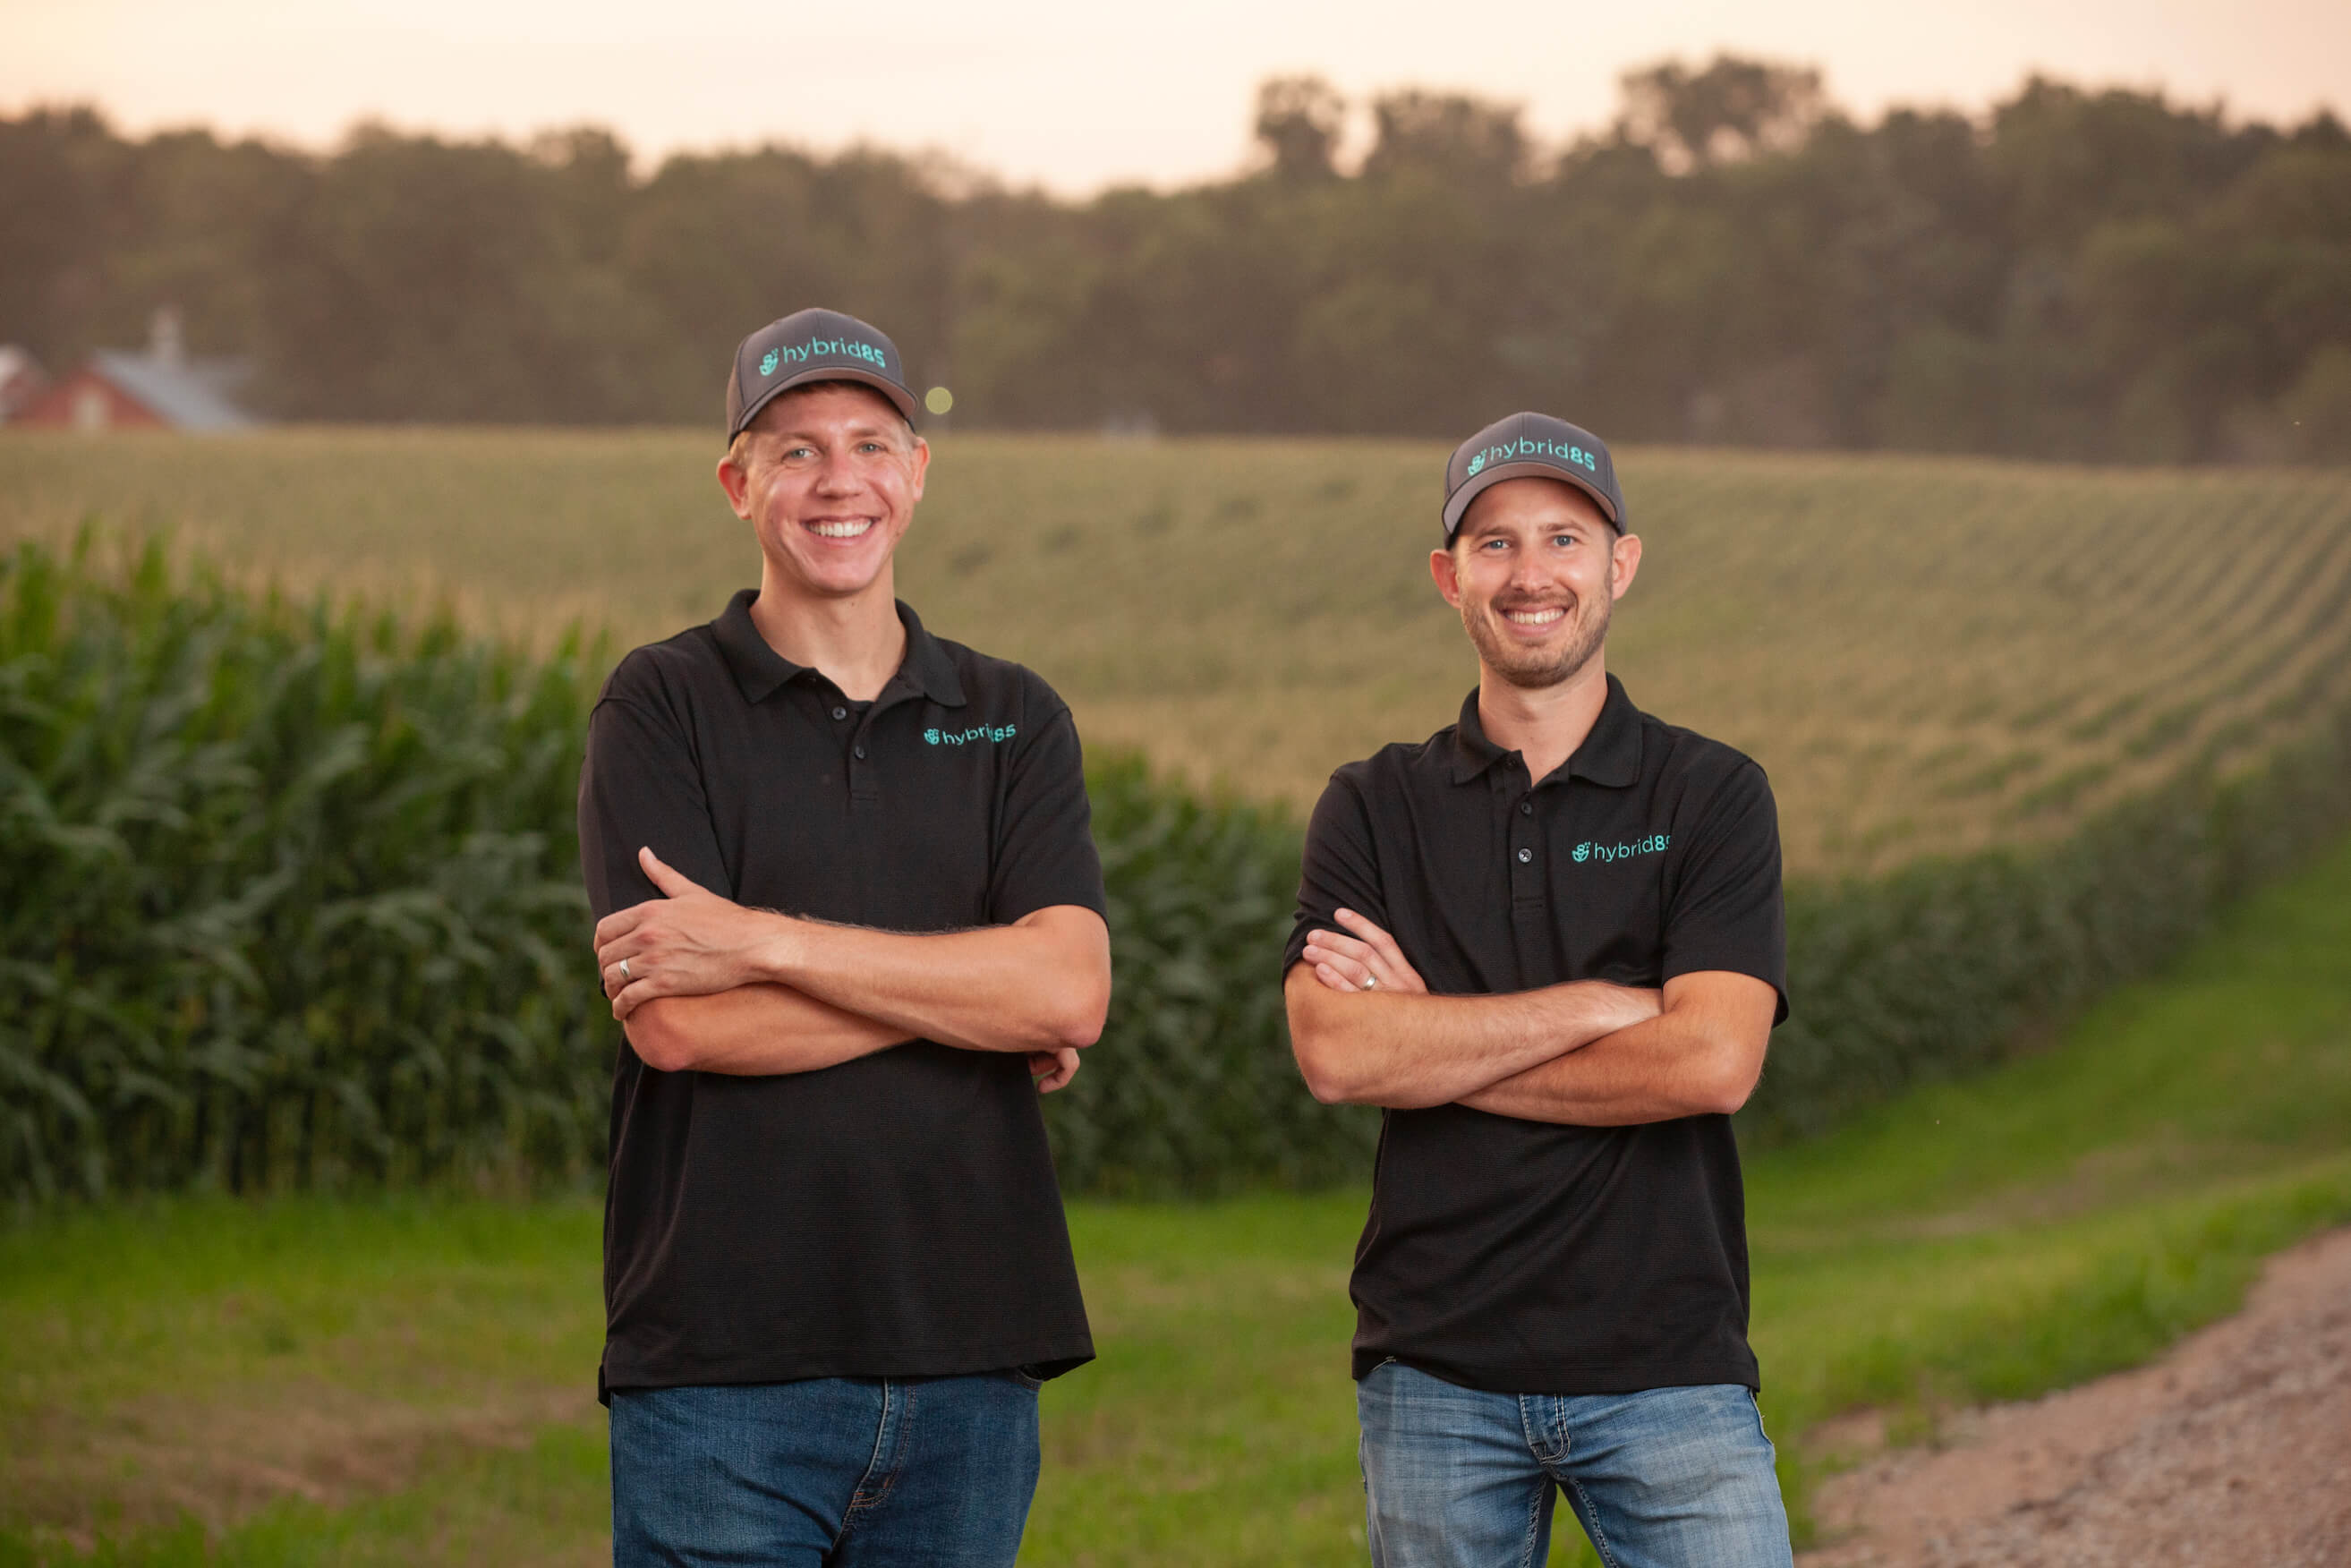 Co Owners of Hybrid85 in front of corn field